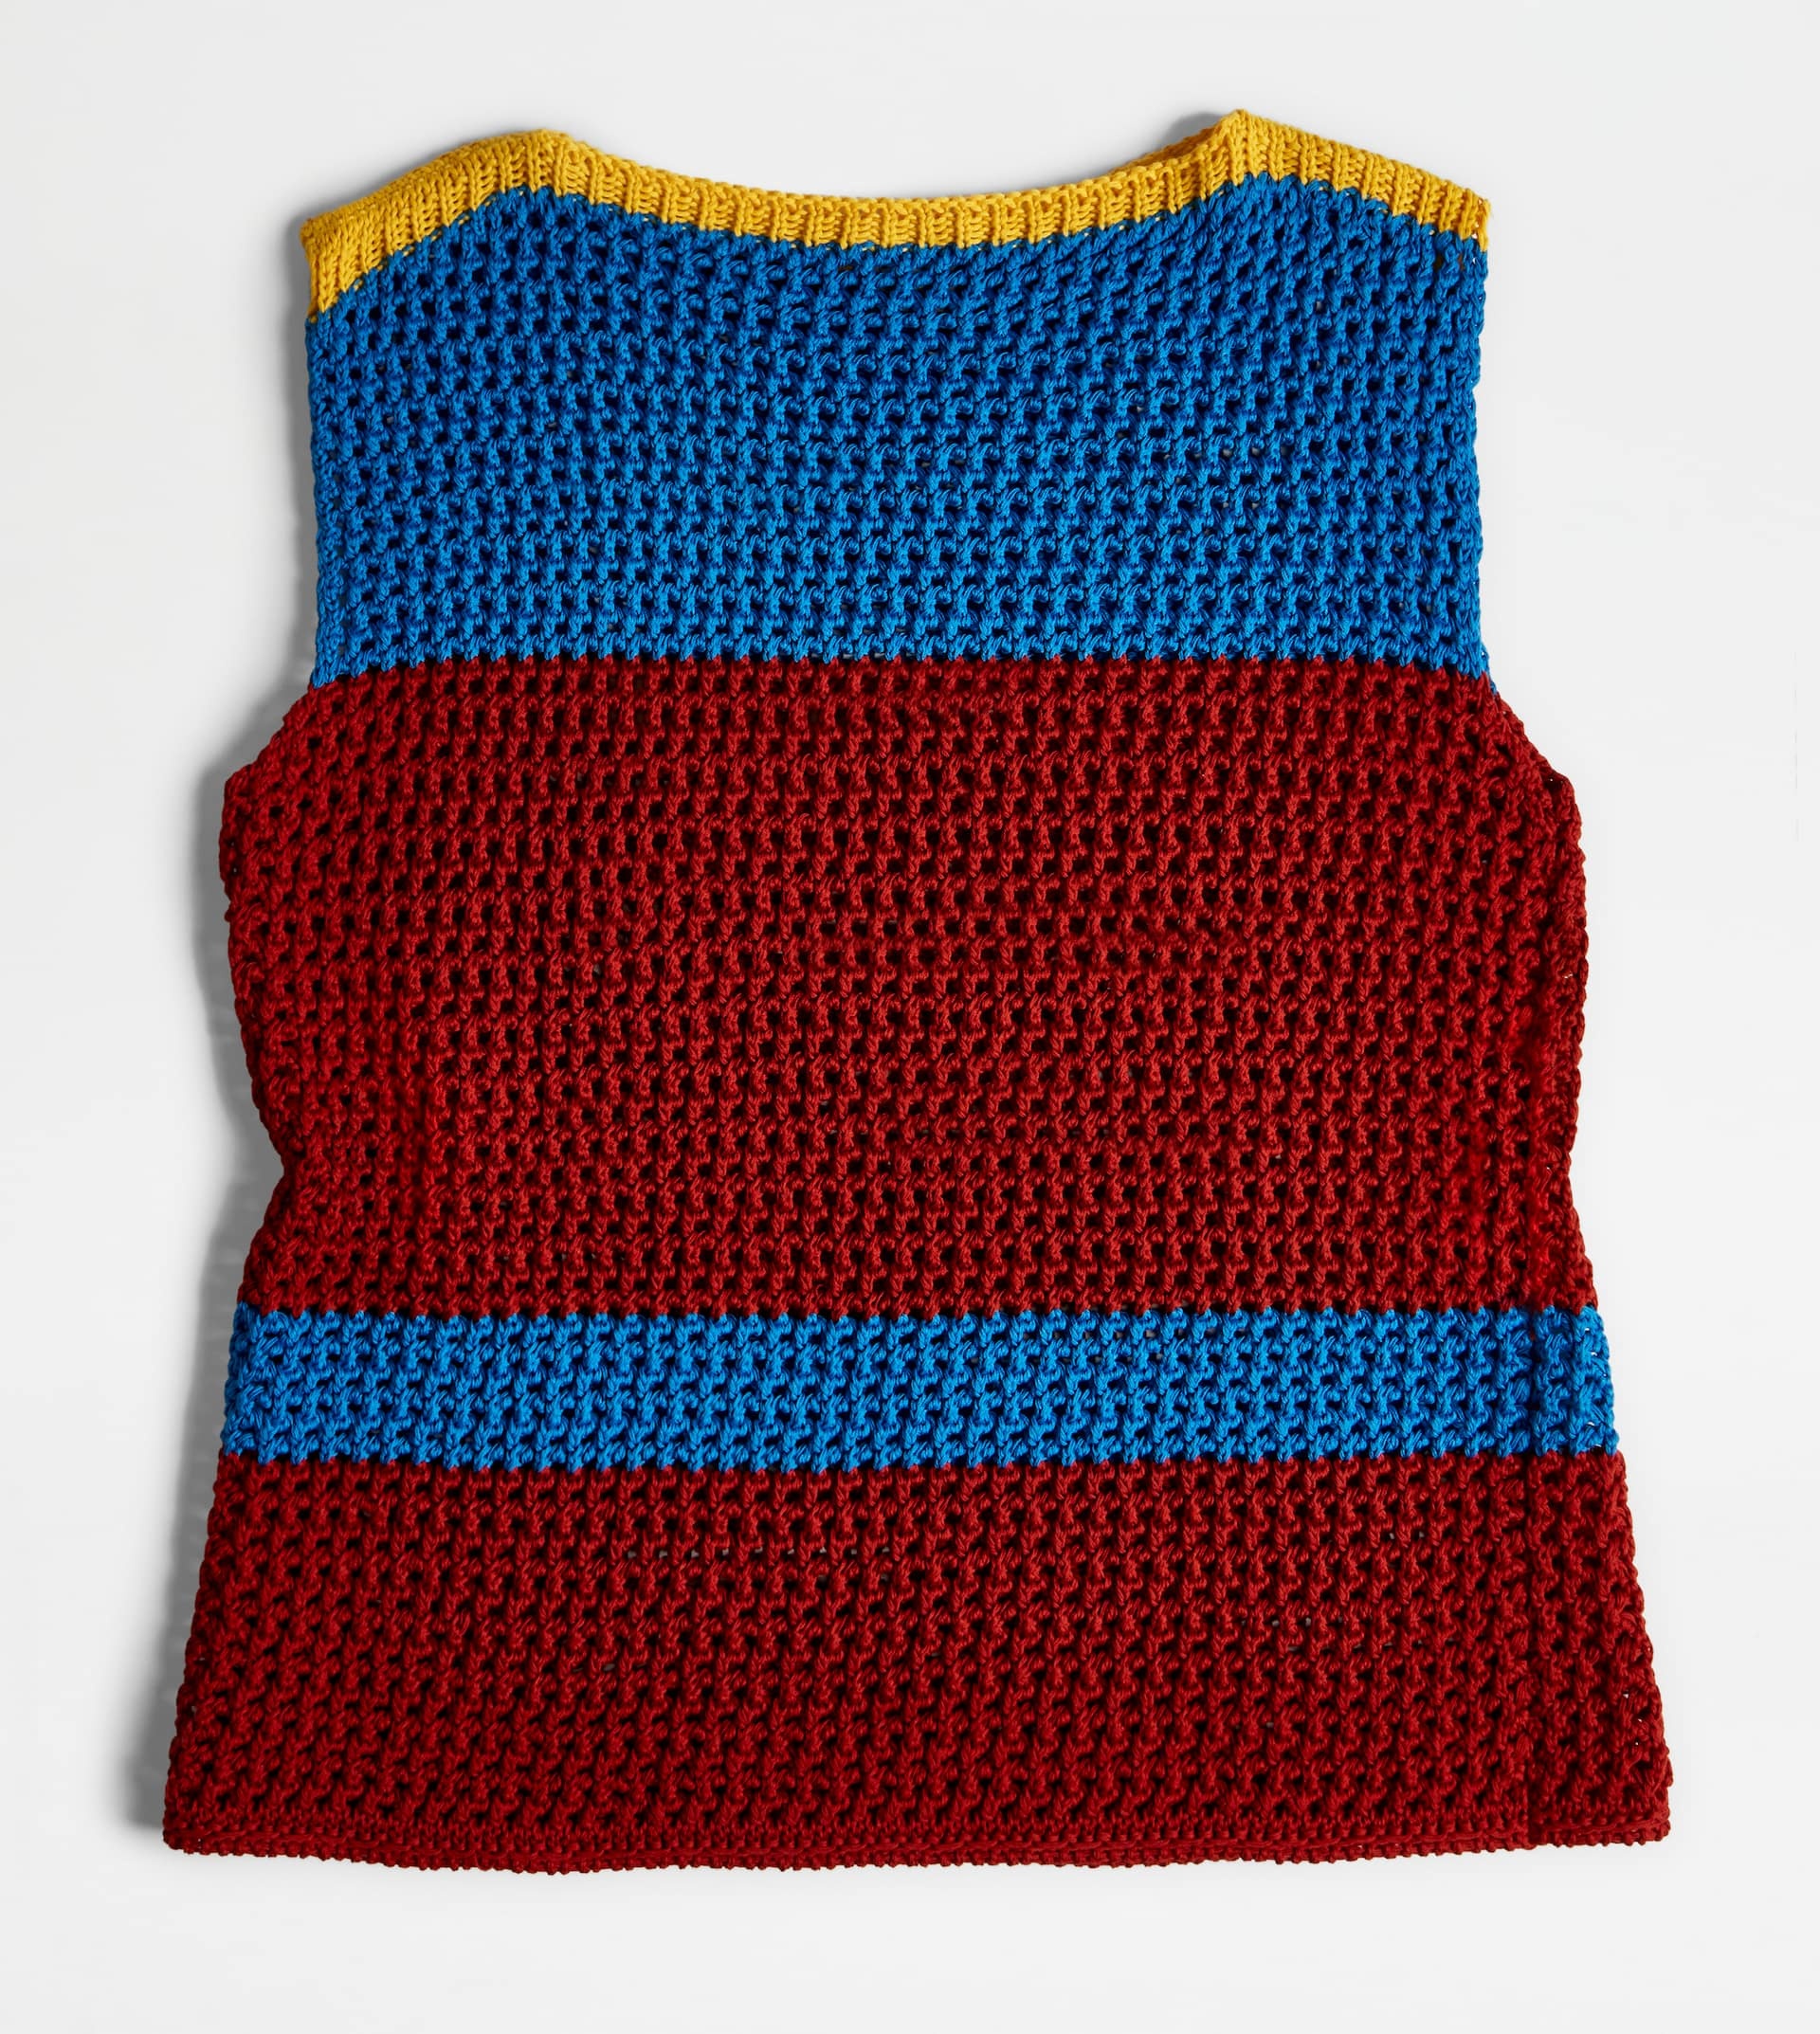 TOP IN COTTON KNIT - RED, LIGHT BLUE, YELLOW - 8